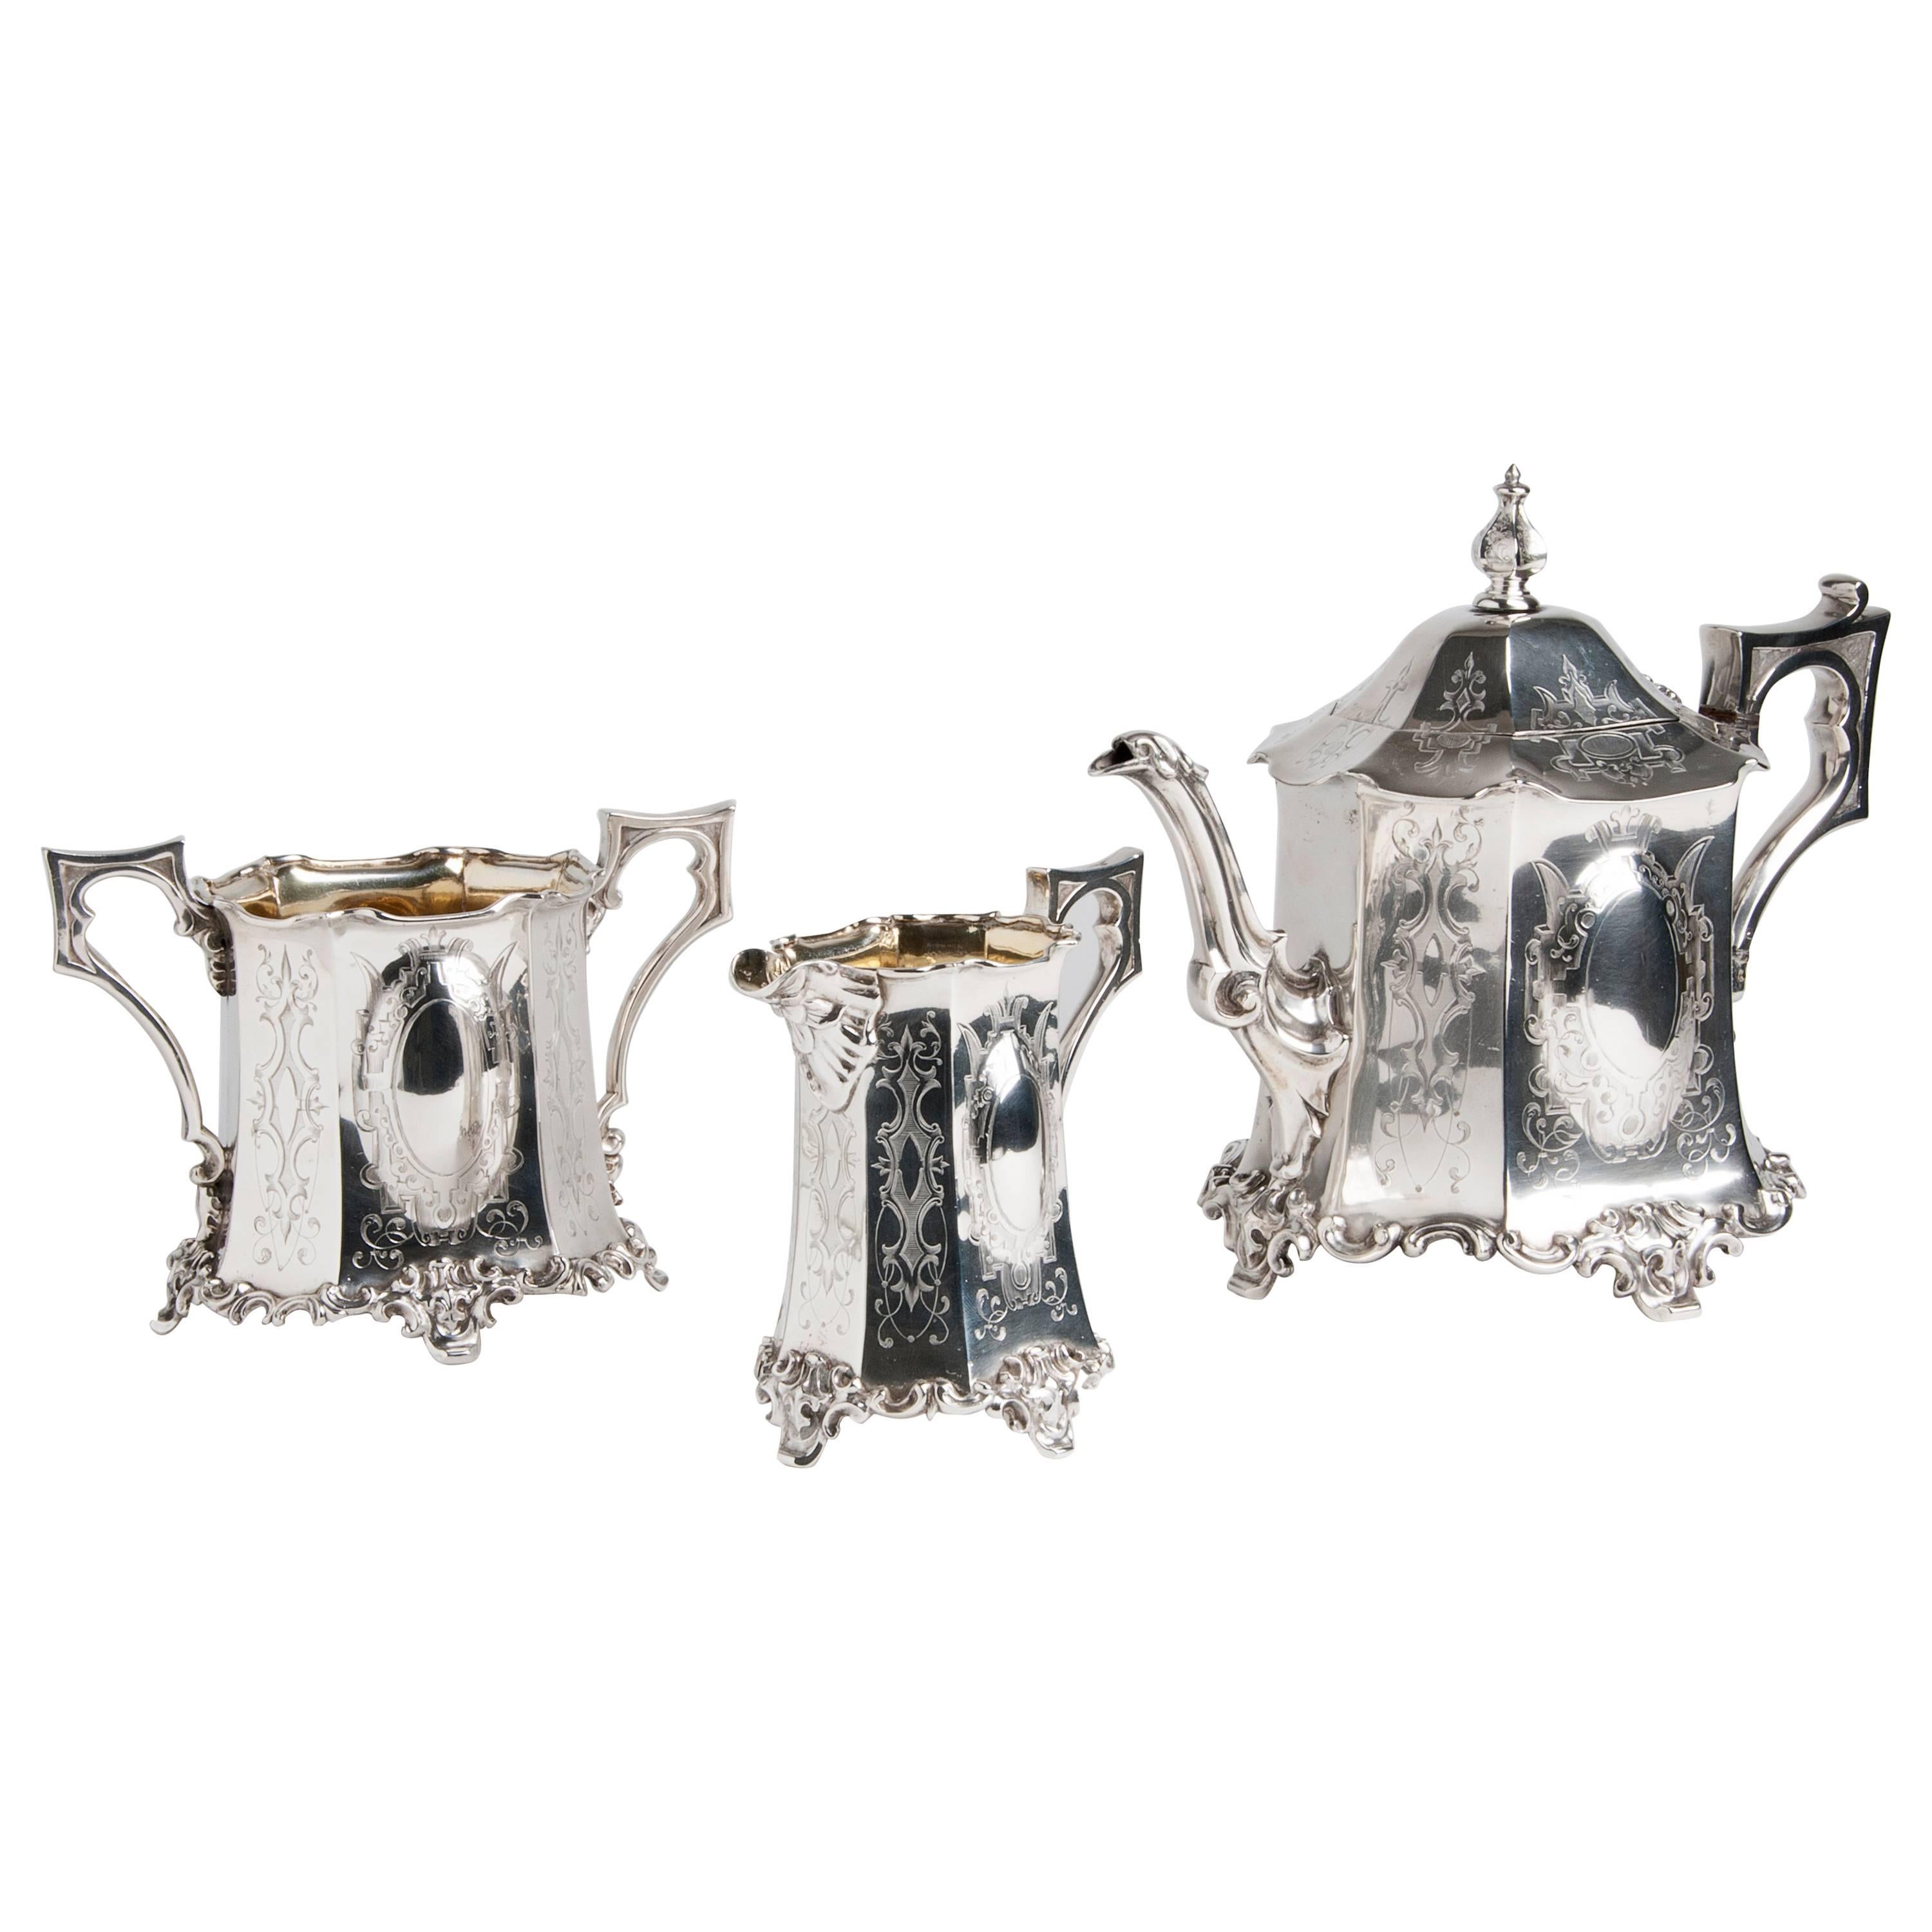 Exceptional Sterling Silver '925‰' Tea Service, Joseph Angell & Son, 1845-1846 For Sale